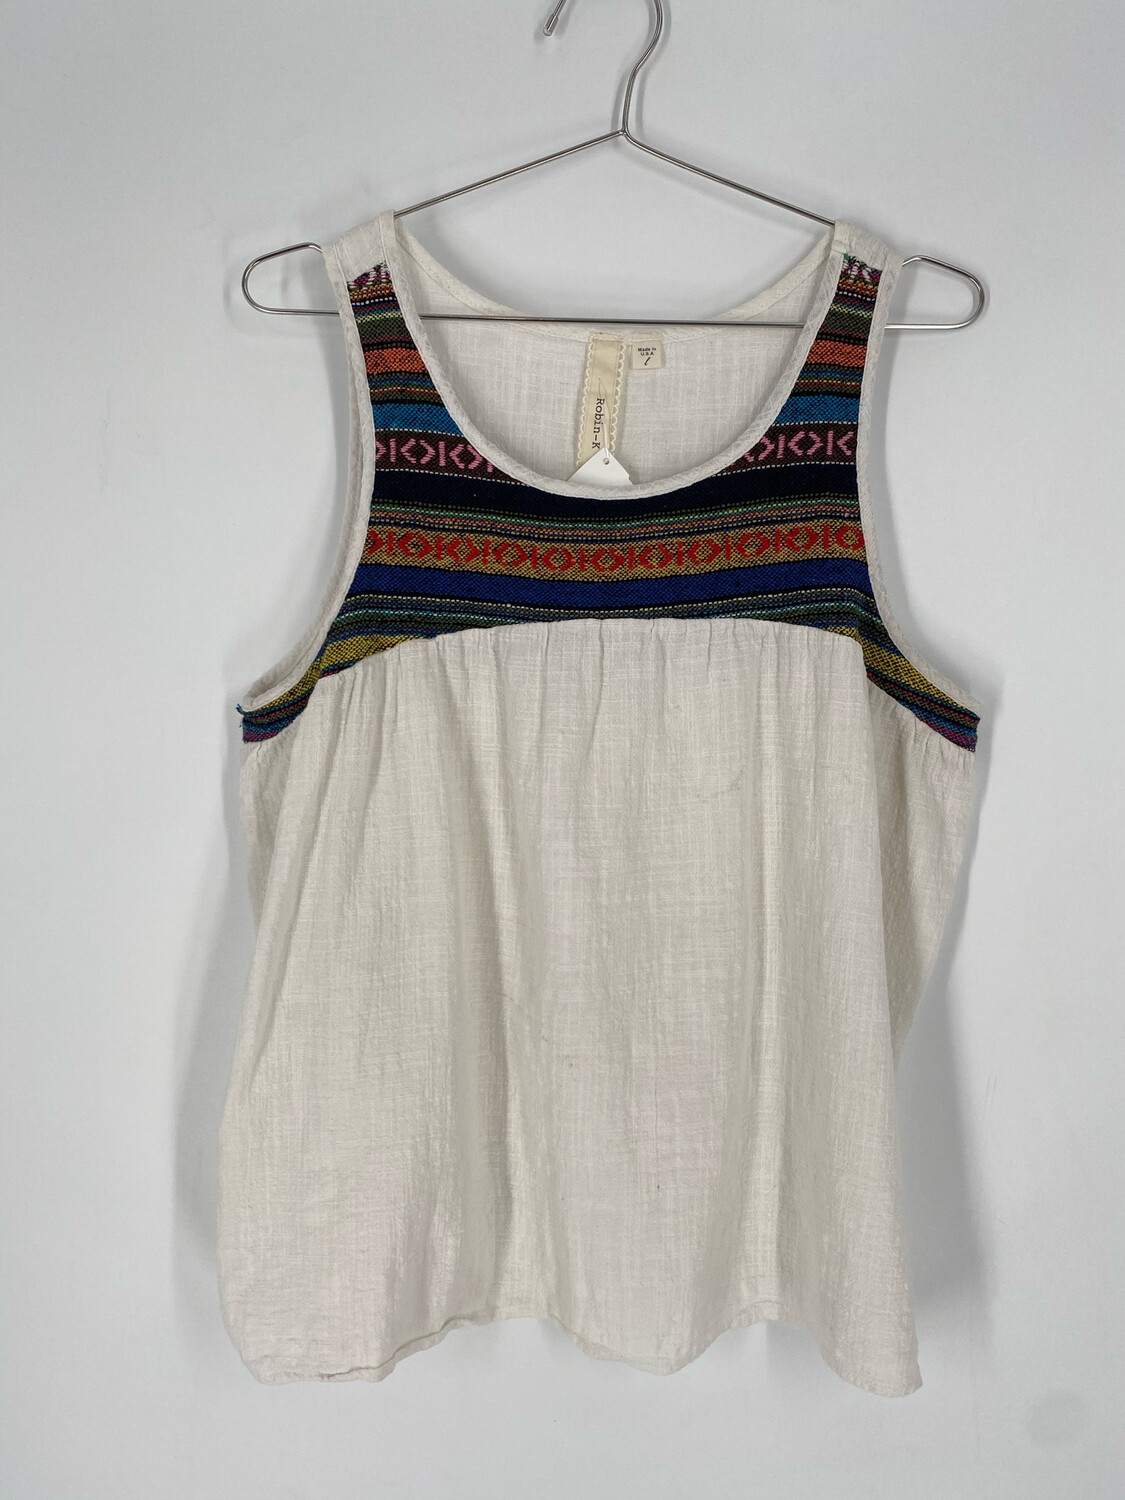 Robin-K Embroidered Tank Top Size L